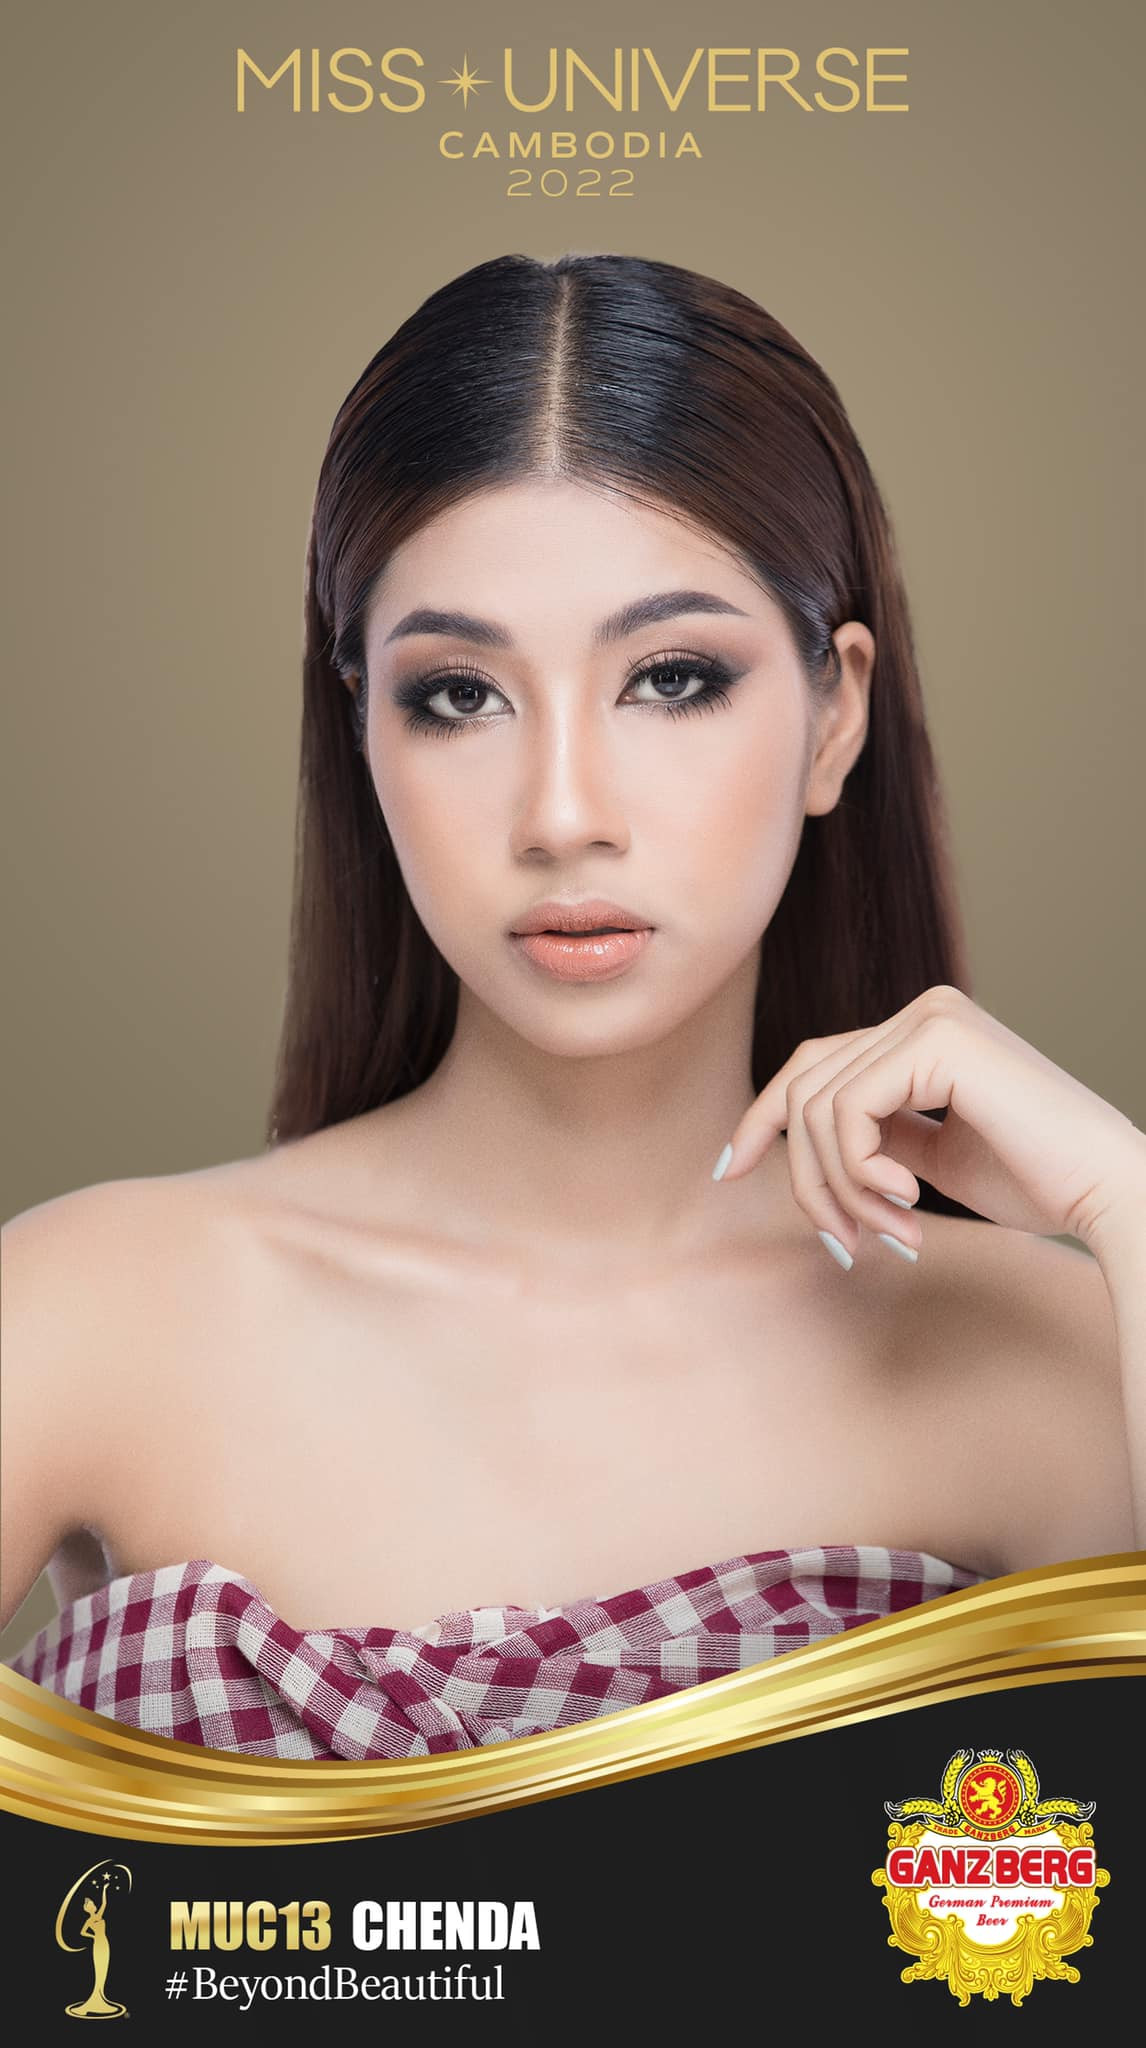 candidatas a miss universe cambodia 2022. final: 15 june. X2ozOl